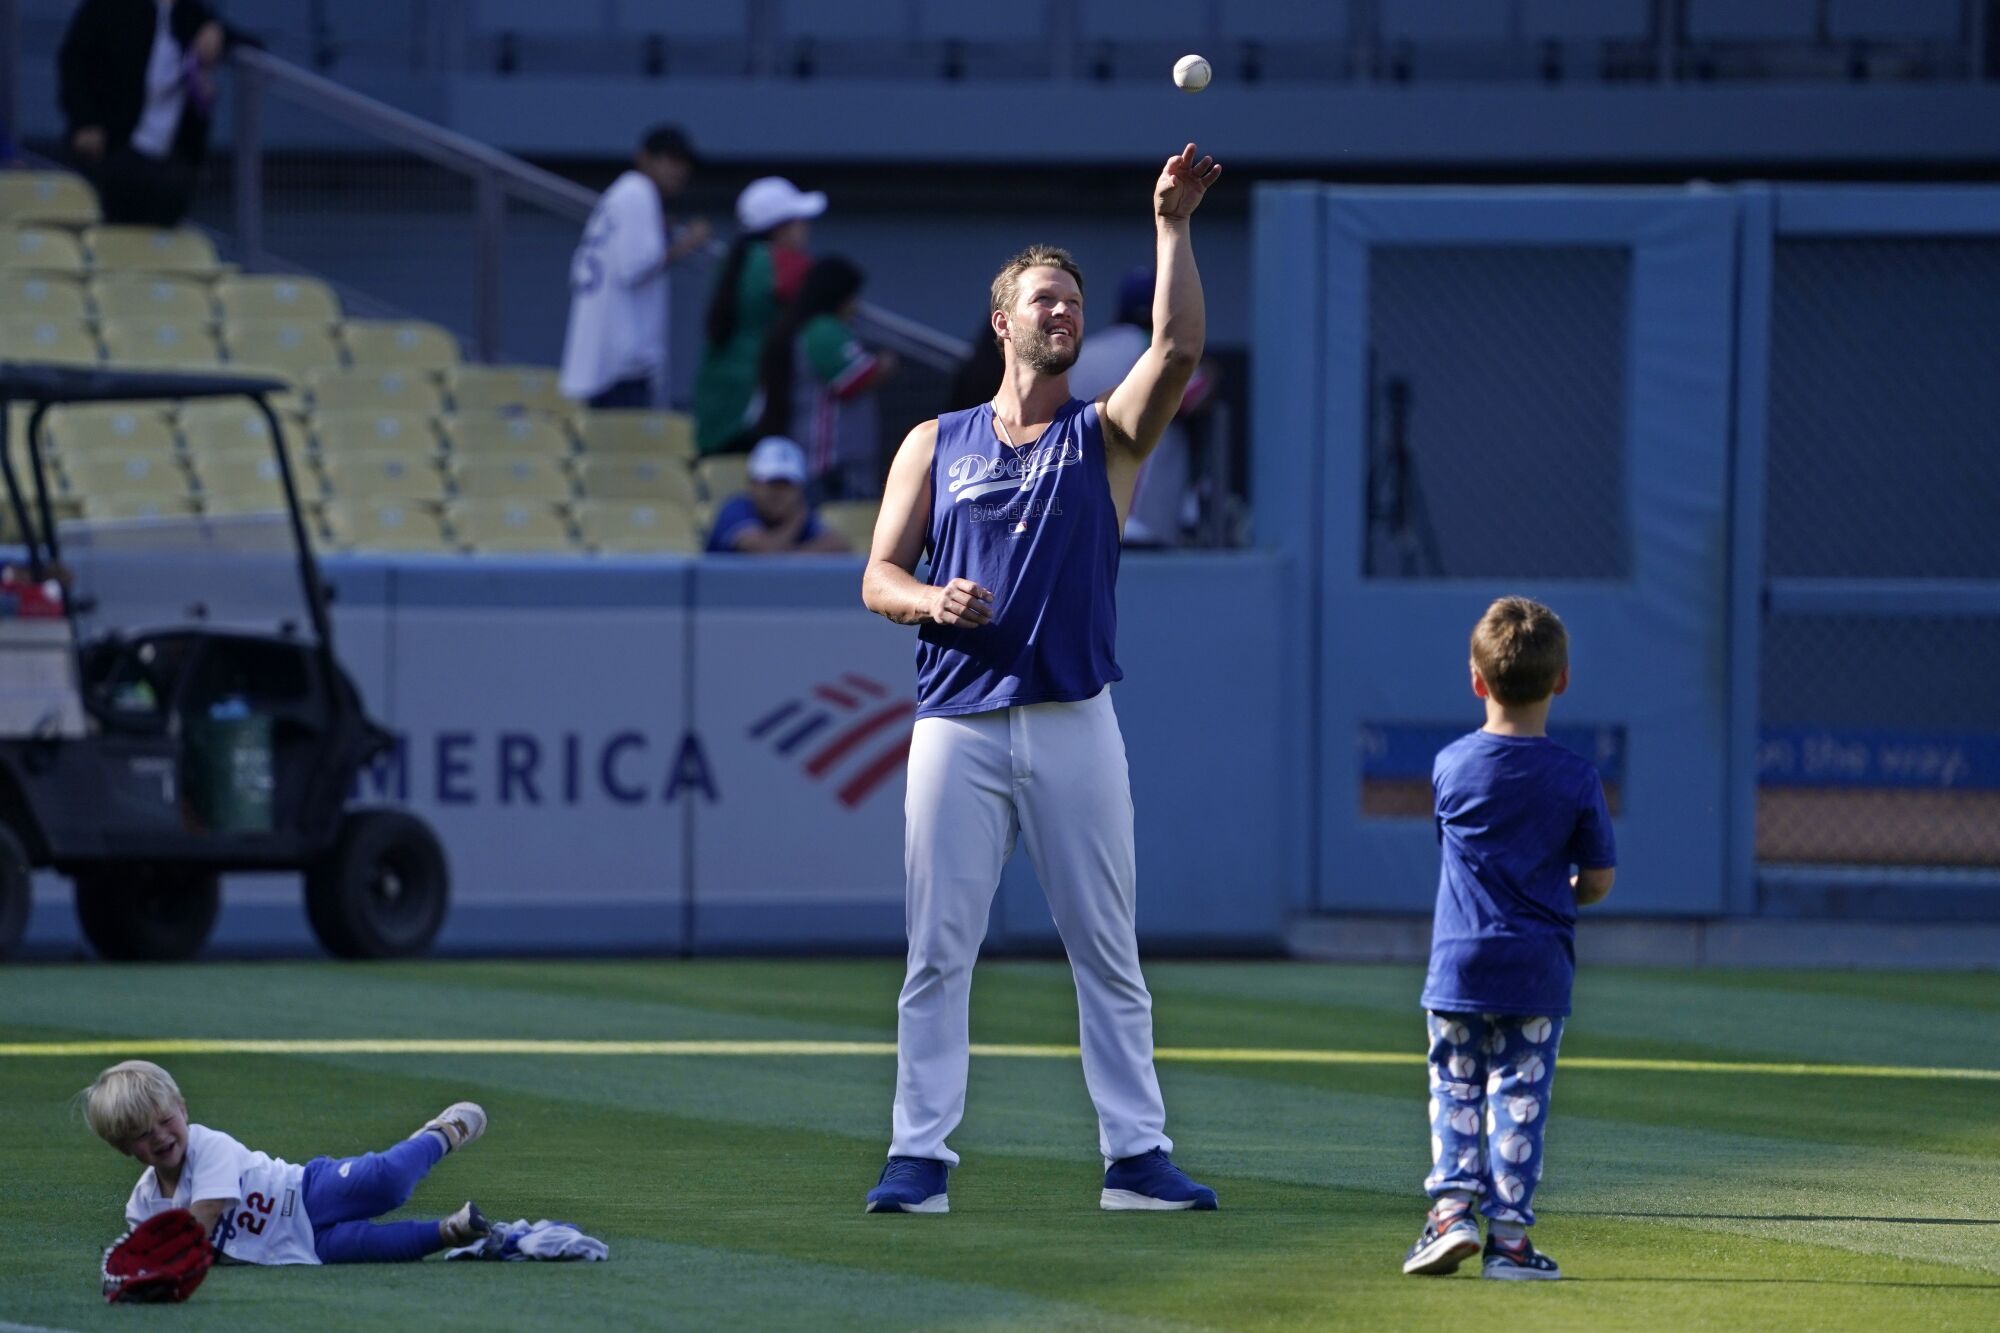 Clayton Kershaw plays catch with his son Charley, right, as his other son Cooper rolls on the grass.